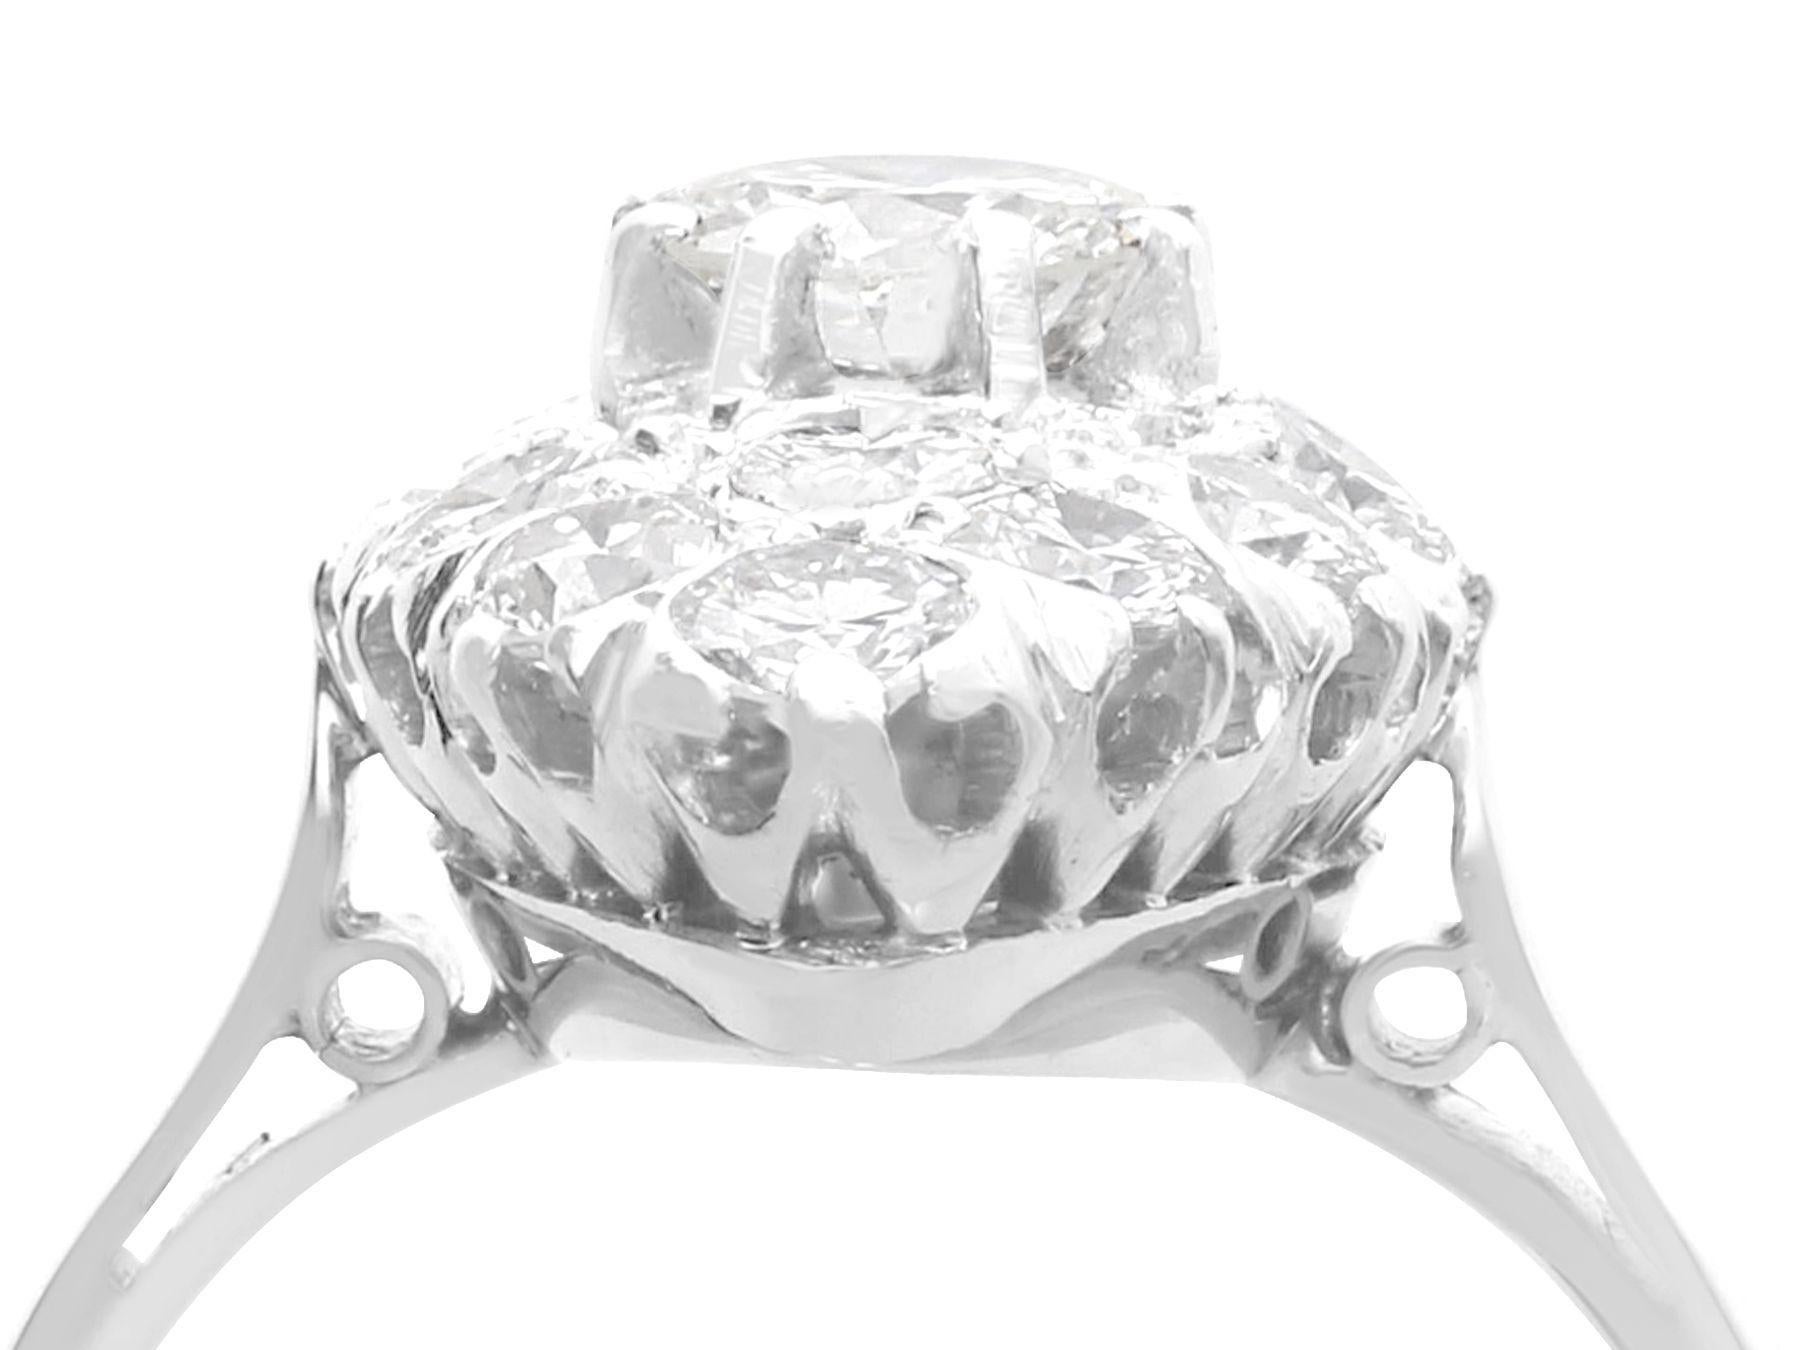 A stunning fine and impressive antique 1.78 carat diamond and platinum, marquise shaped cluster ring; part of our diverse antique jewelry and estate jewelry collections.

This stunning, fine and impressive antique diamond ring has been crafted in